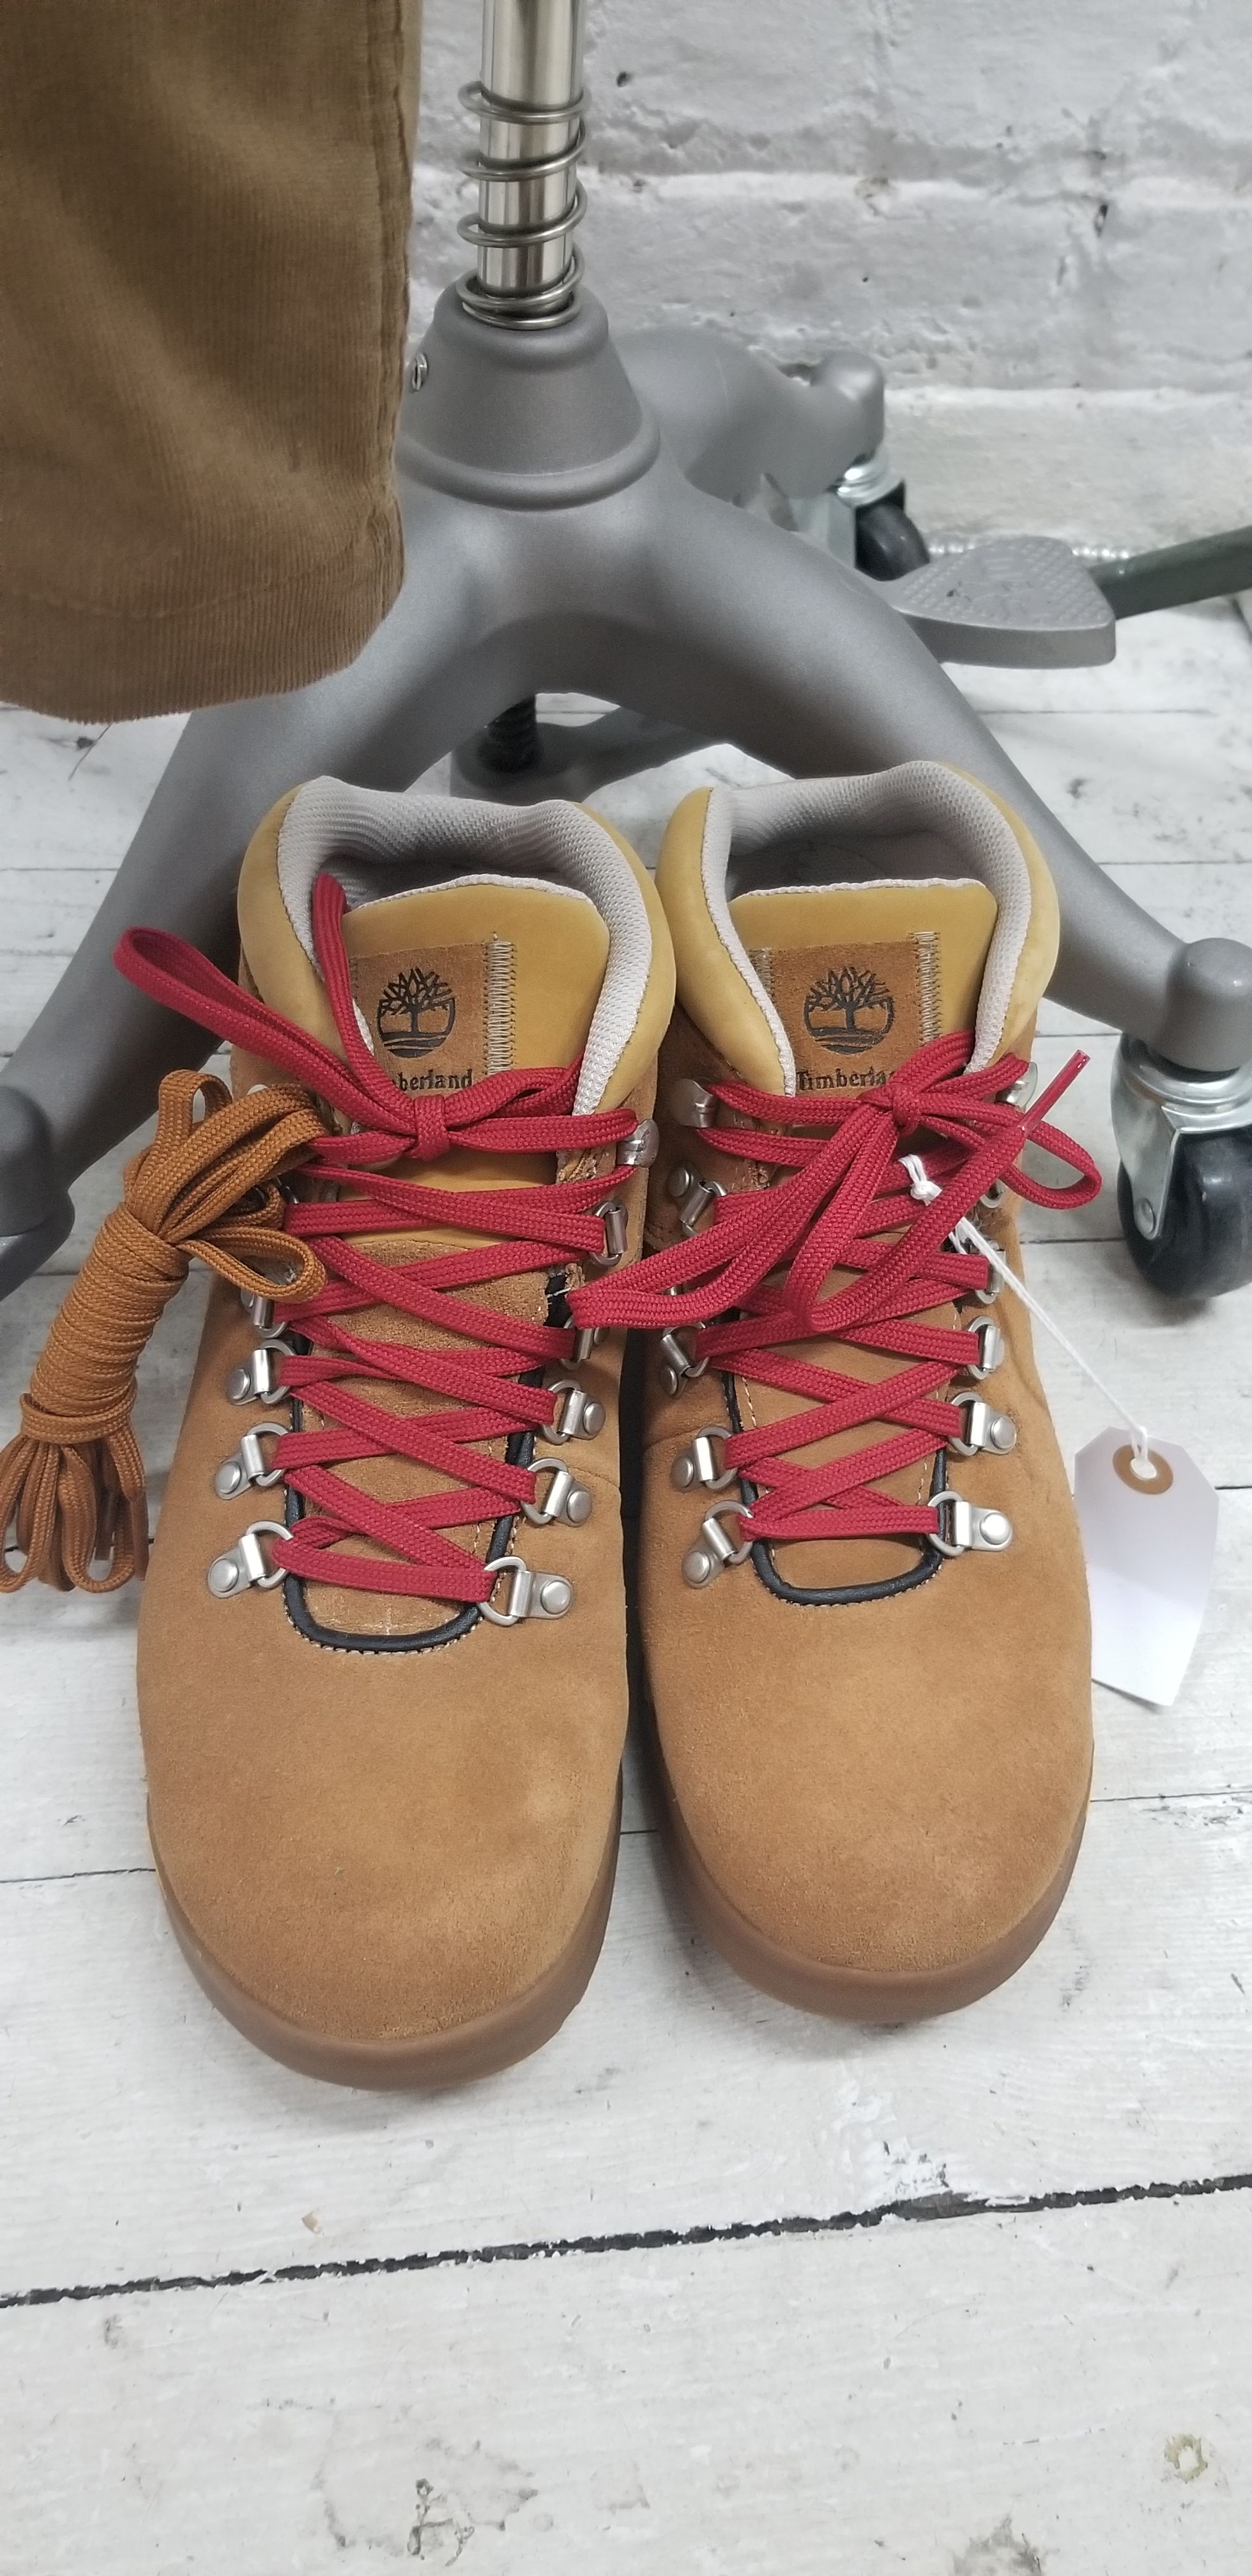 Timberland for J.Crew Scramble hiking boots - for Sale in NY - OfferUp